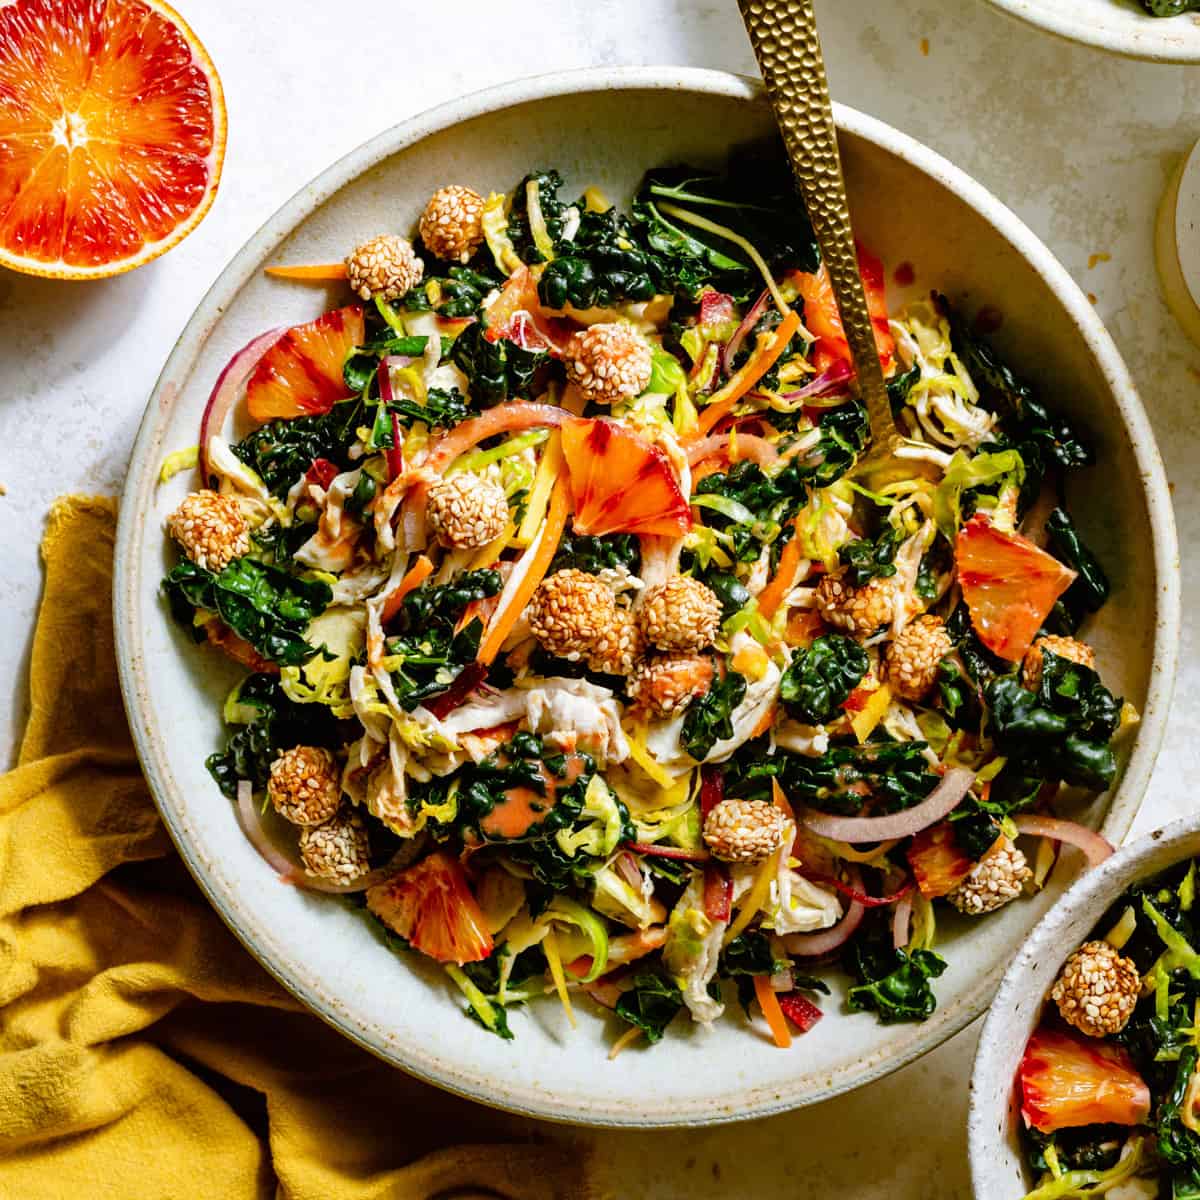 Chicken kale citrus salad in a bowl with a fork and blood orange to the side.